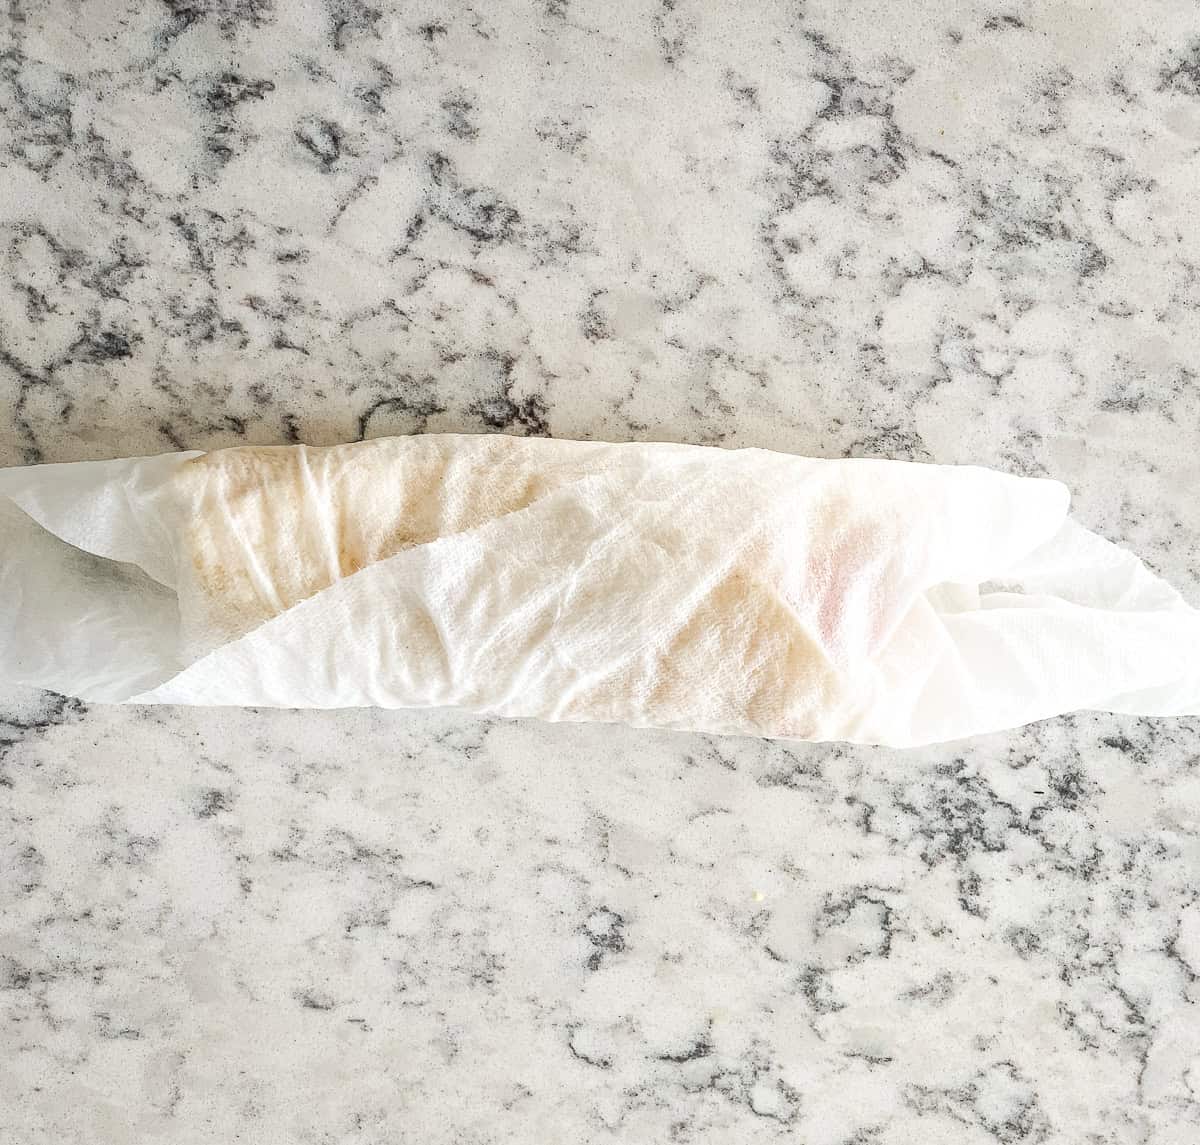 meximelt wrapped in a damp paper towel